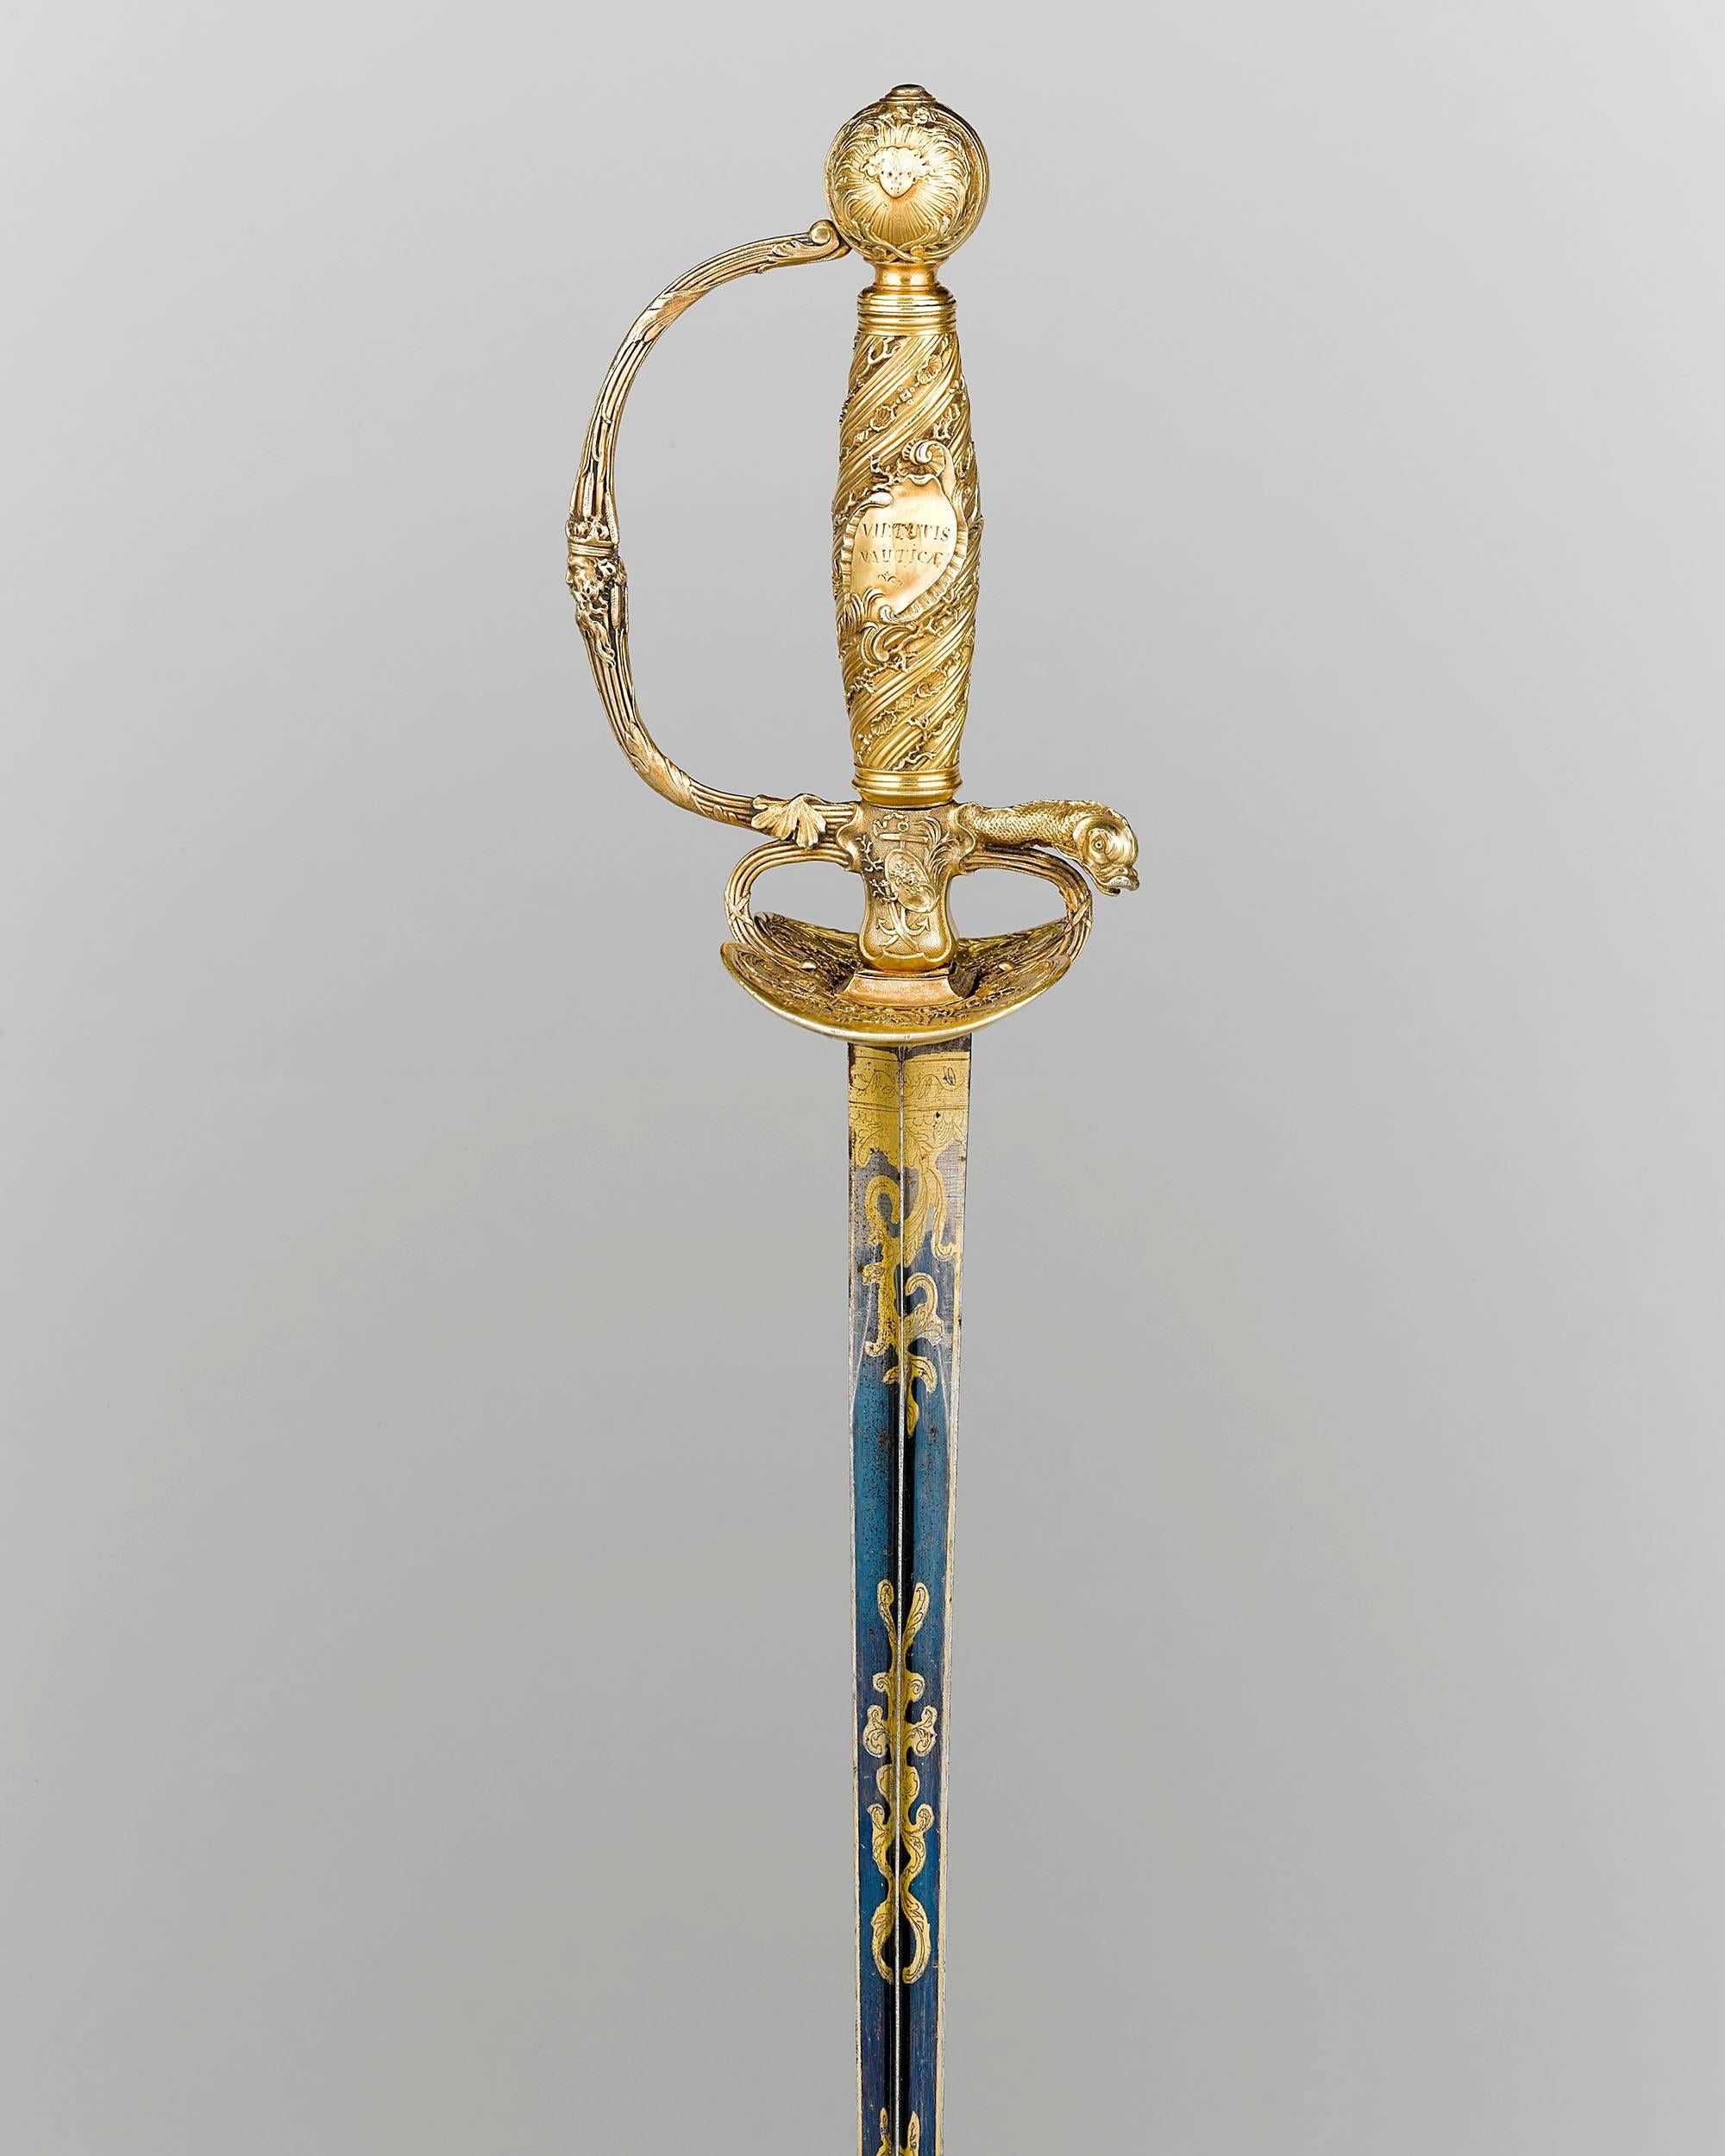 This remarkably rare silver gilt presentation sword was a personal gift from Louis XV, King of France, to the Captain of the Corsairs, Alain Porée. Adorned by a myriad of gilt marine motifs, it is one of two Royal swords presented by the French